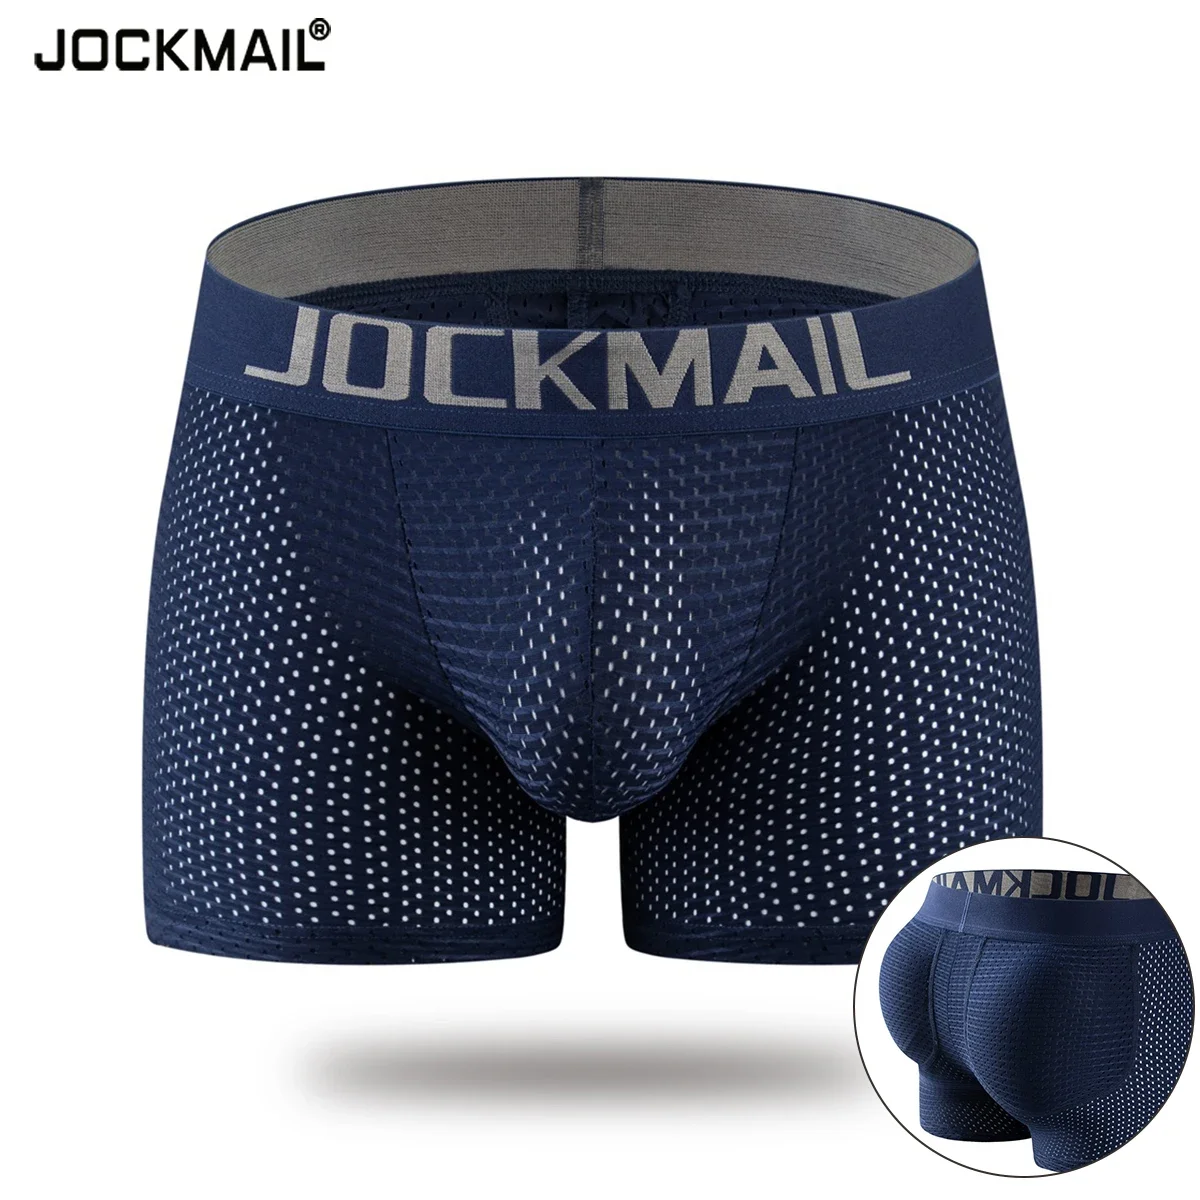 JOCKMAIL Sexy Underwear Men's Boxer Shorts Mesh U Pouch Sexy Underpants with Hip Pads Cueca Boxer Men Sleep Bottoms Male Trunks sexy men mesh thin transparent boxer briefs u convex pouch underwear comfortable shorts trunks mans ultra thin stretch underpant